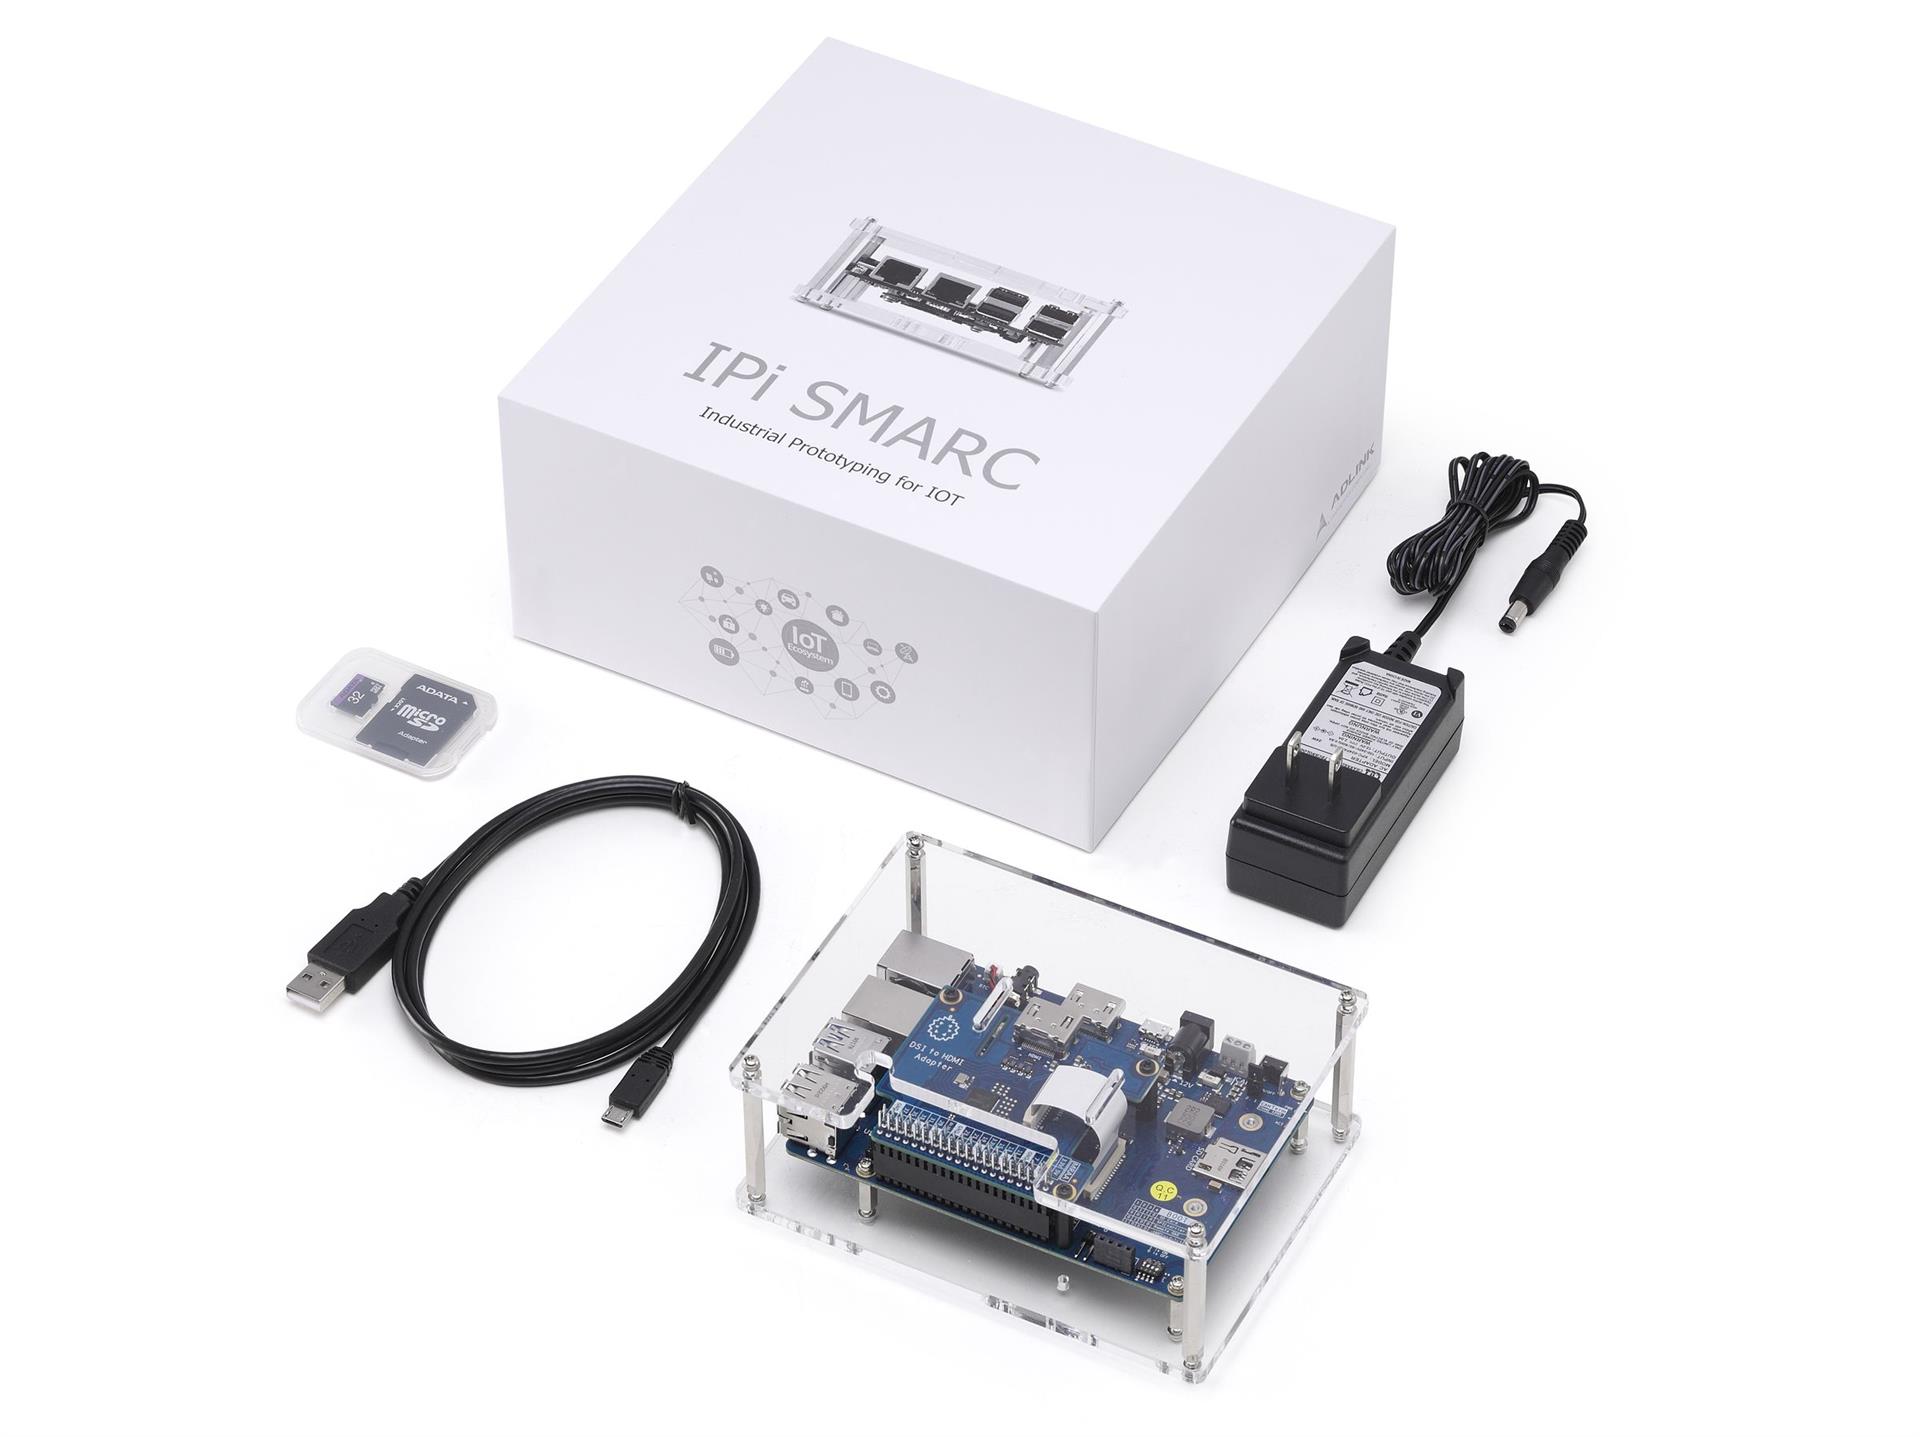 ADLINK&rsquo;s I-Pi SMARC development kit<br />Figure 2: ADLINK’s I-Pi SMARC development kit. ADLINK’s I-Pi SMARC development kit contains everything an engineer needs to get started on an industrial prototype. (Image source: ADLINK)